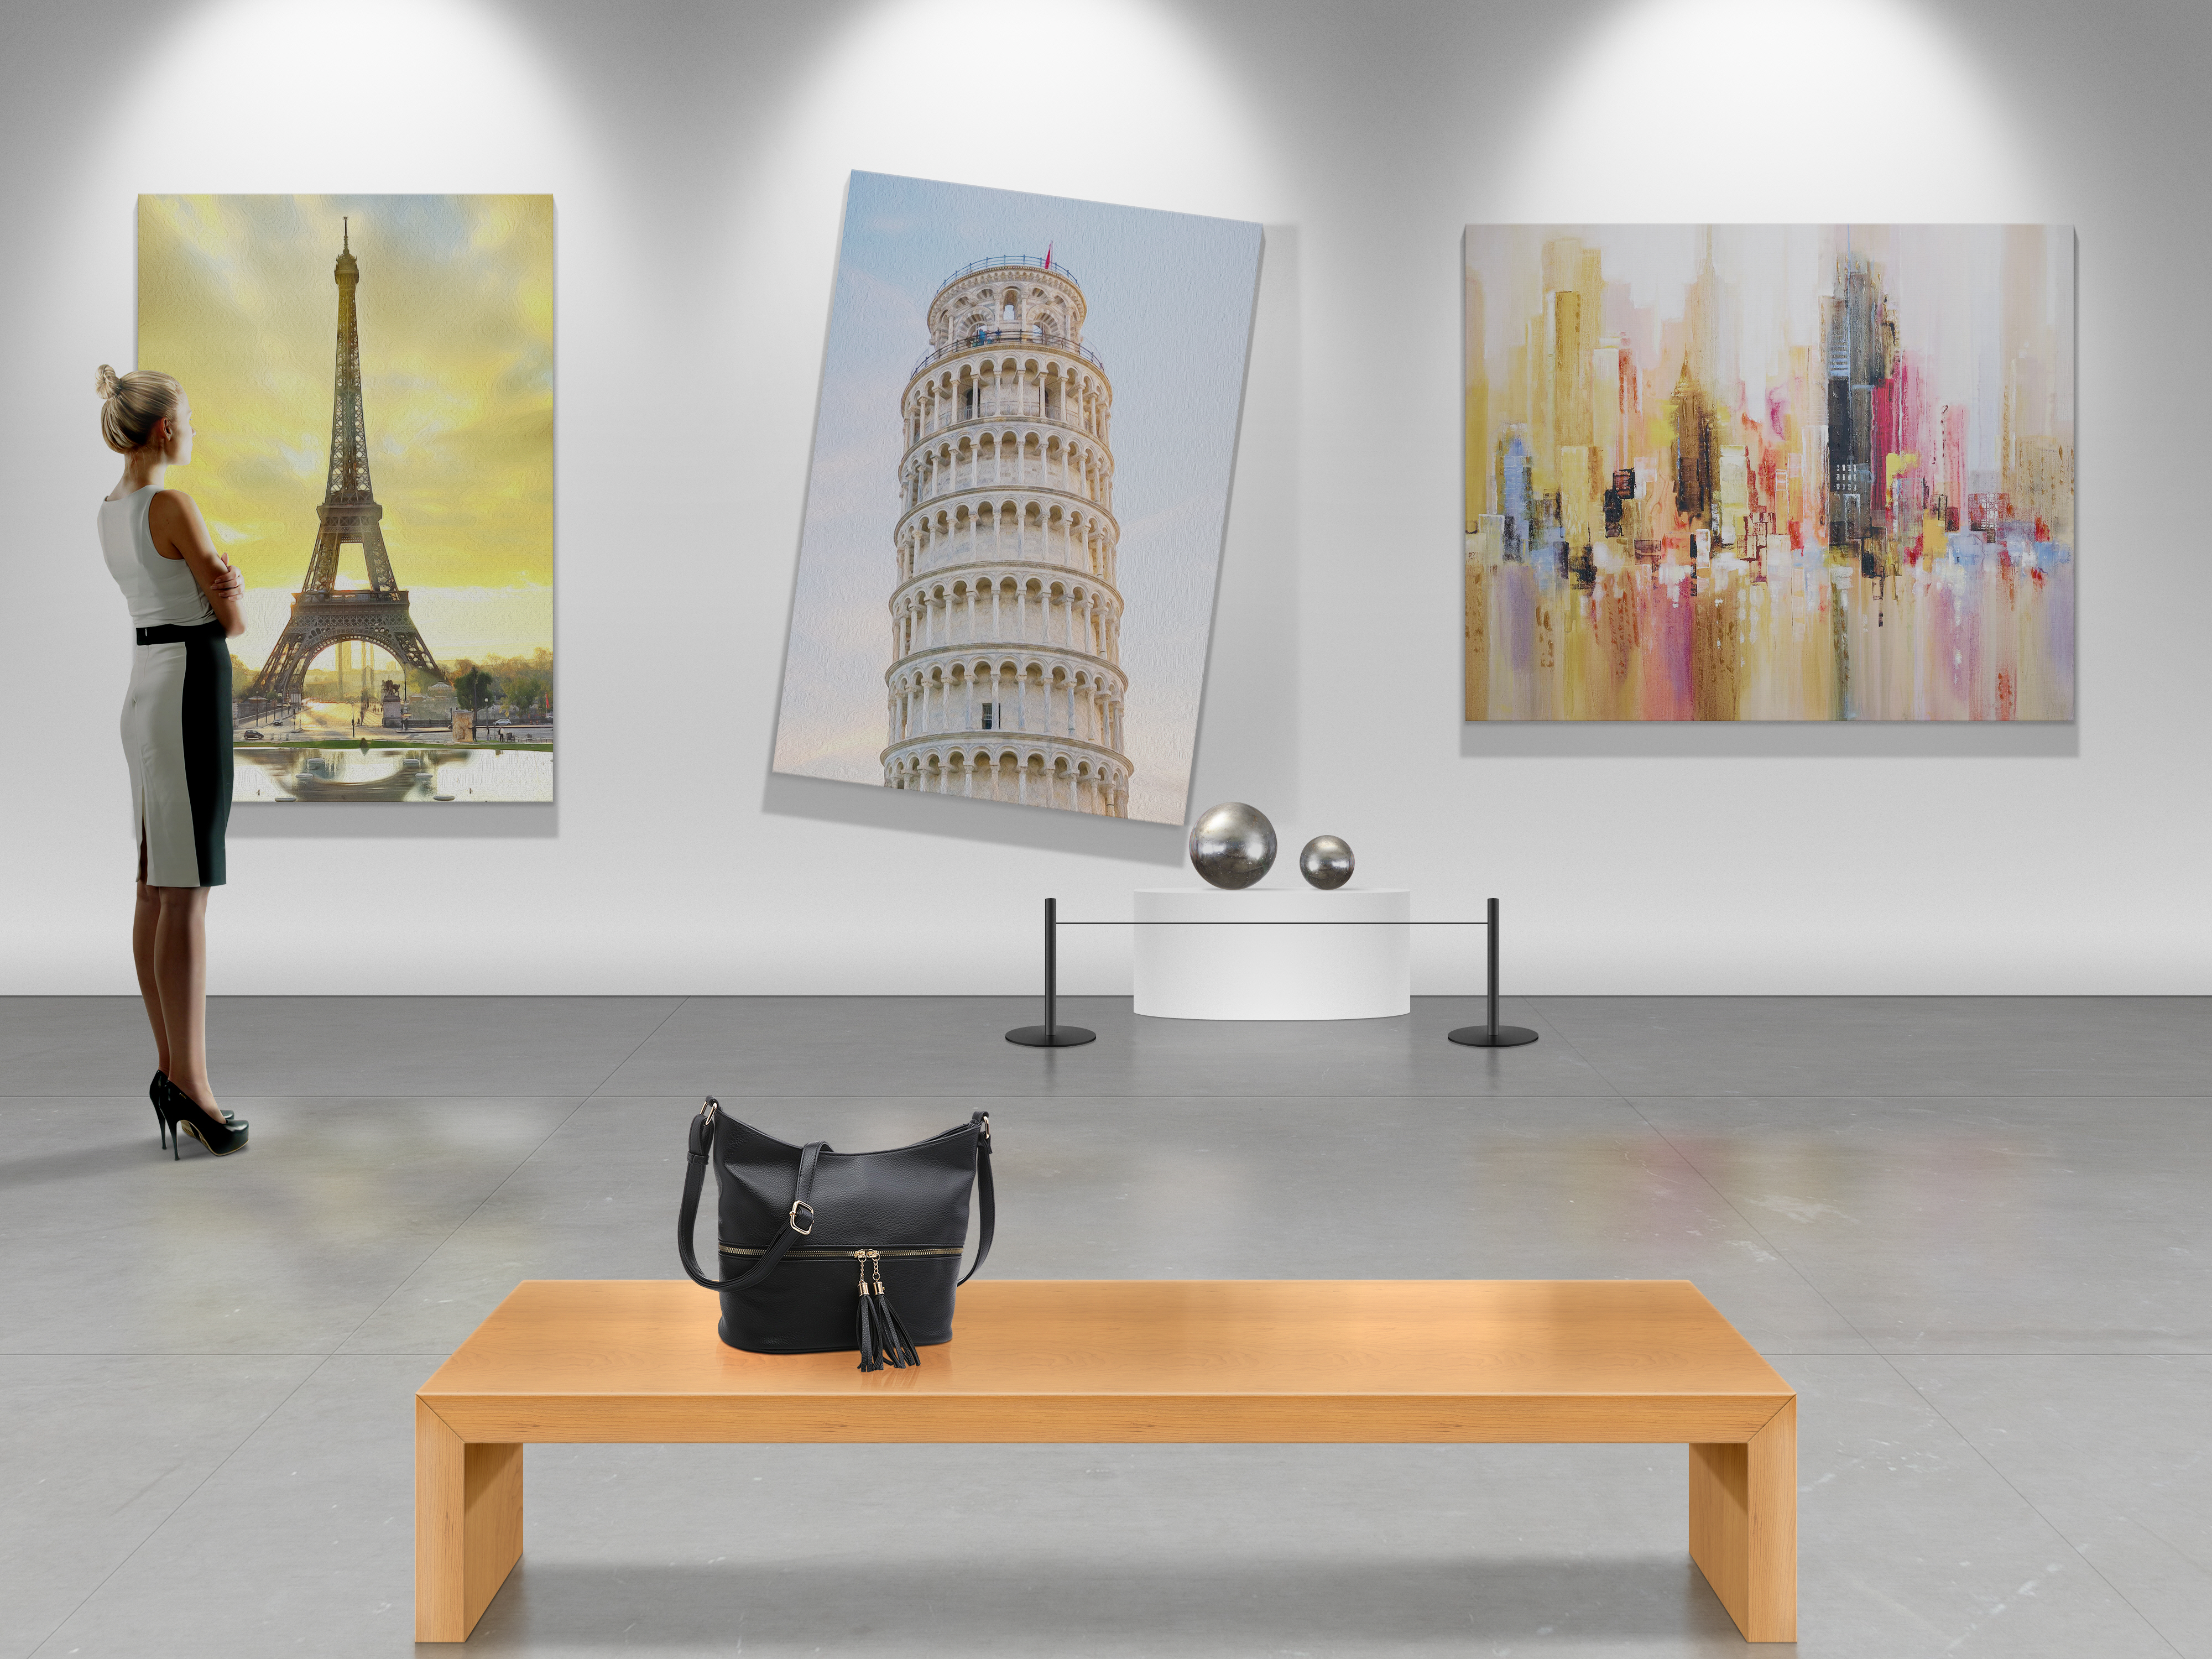 Art Gallery Picture Frames Purse Eiffel Tower Building Picture Women Leaning Tower Of Pisa 4000x3000